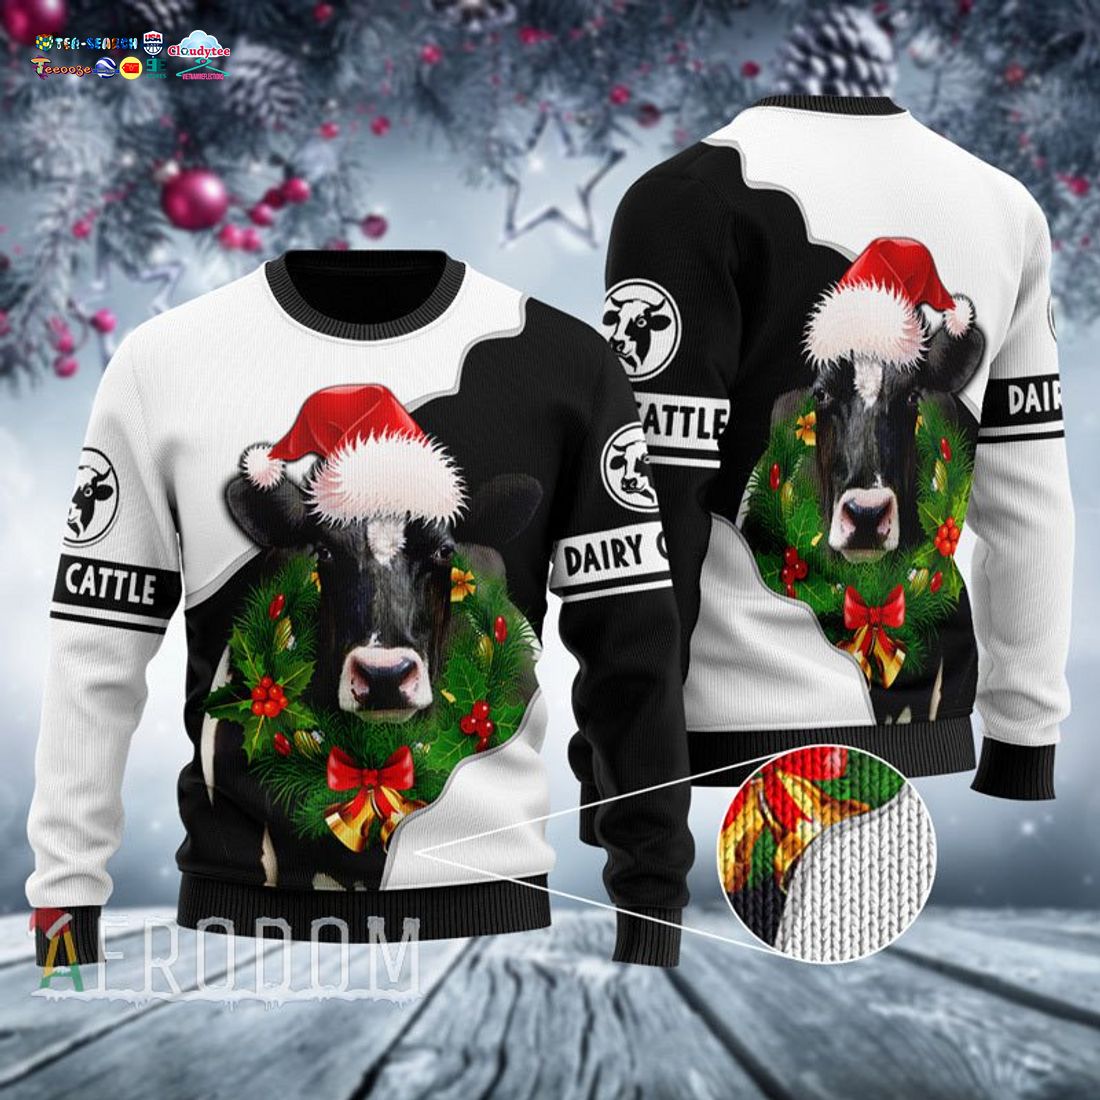 Dairy Cattle Ugly Christmas Sweater - Gang of rockstars